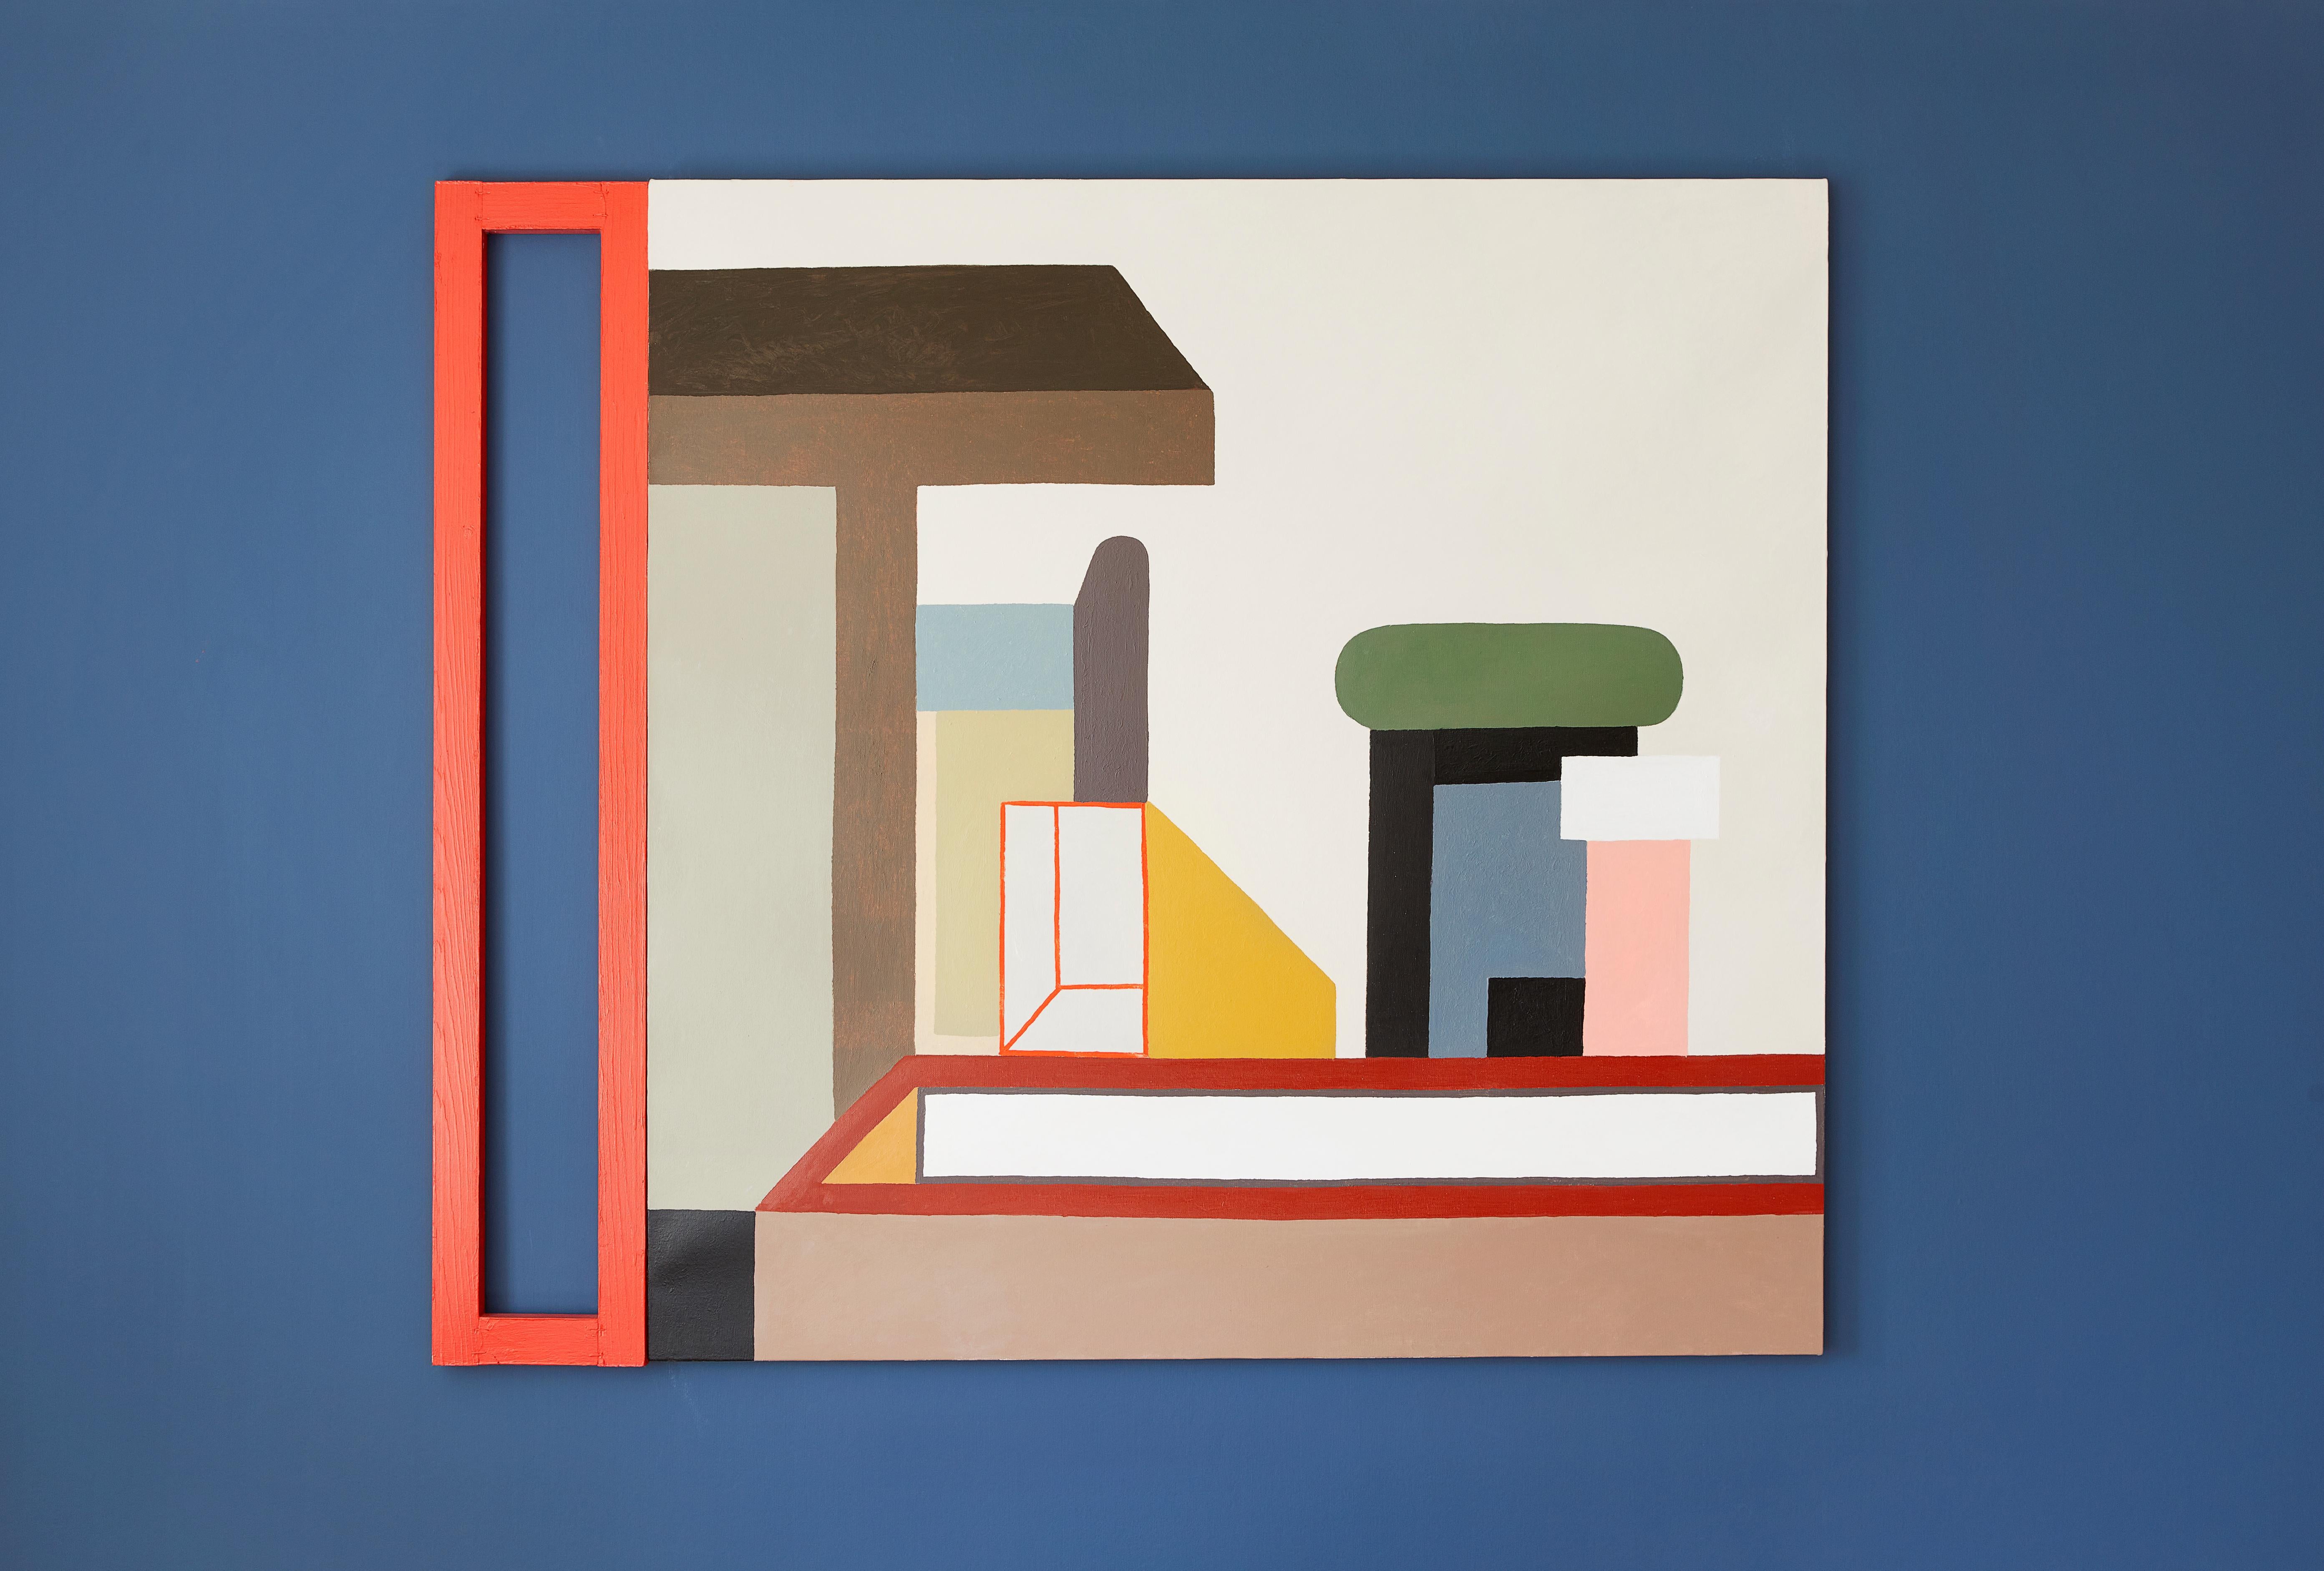 Nathalie du Pasquier 

Italy, 2017

Untitled. Oil on canvas with painted wood. 
Nathalie du Pasquier was part of the famous 1980s Milanese design collective referred to as the Memphis Group. She worked as an artist after Memphis was disbanded